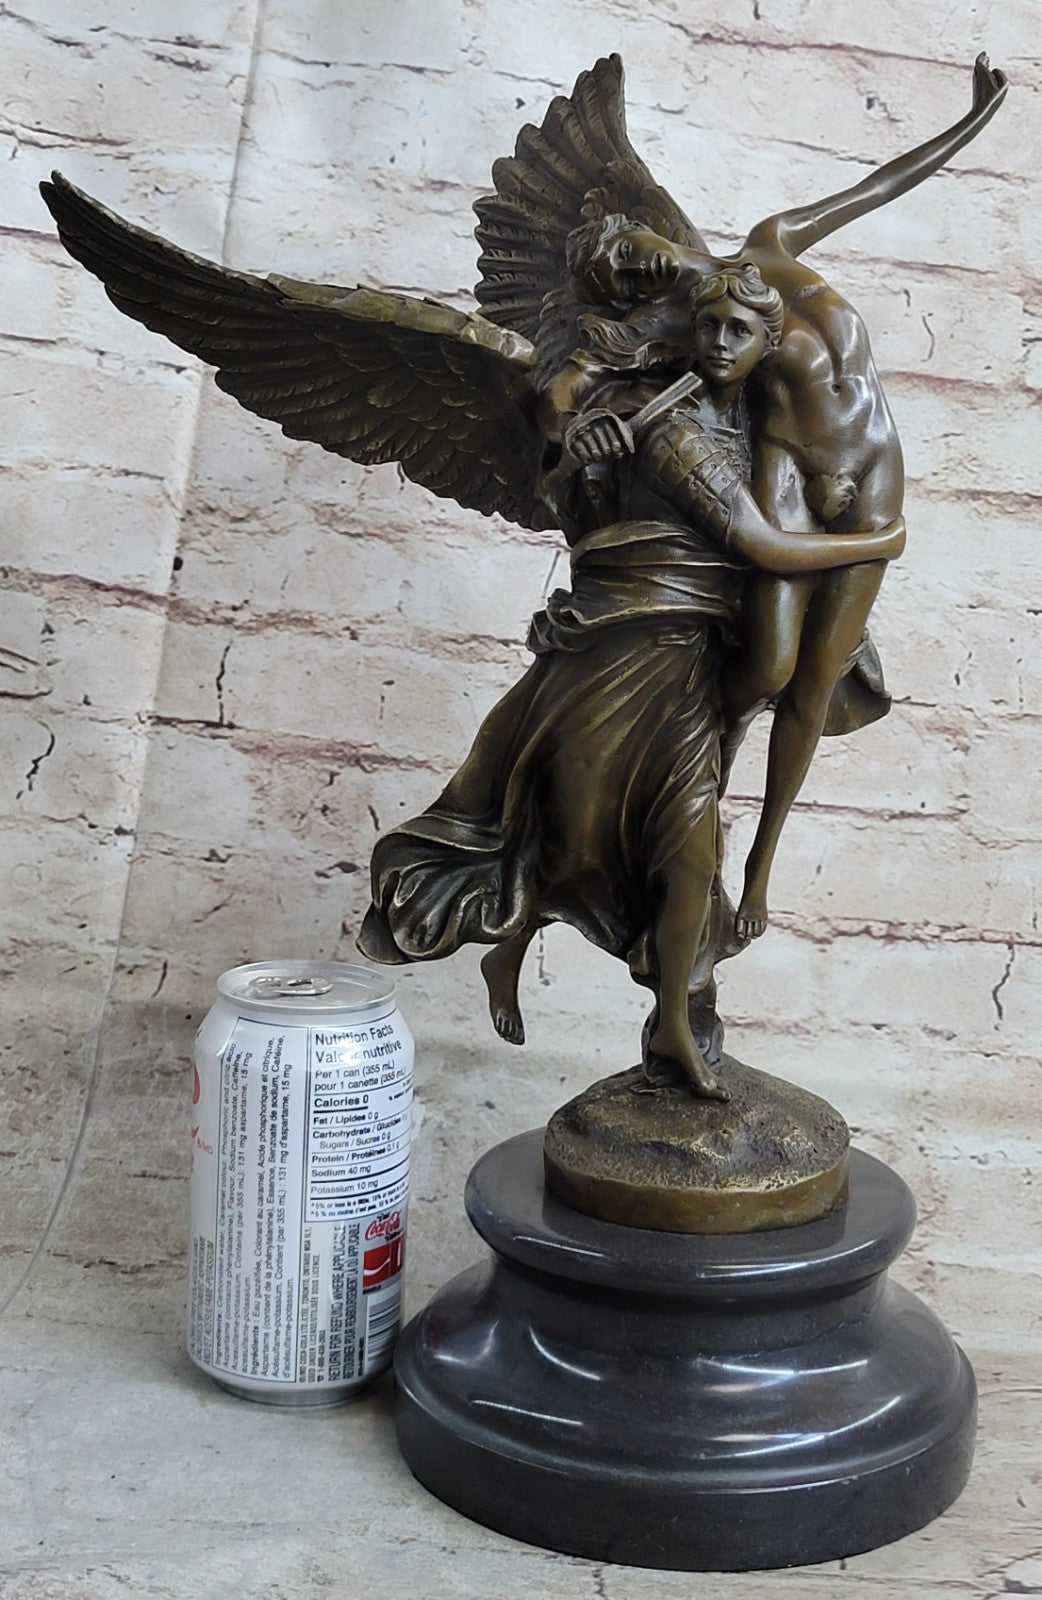 Bronze Statue Titled "Gloria Victis" the Winged Figure of Victory Hot Cast Figure